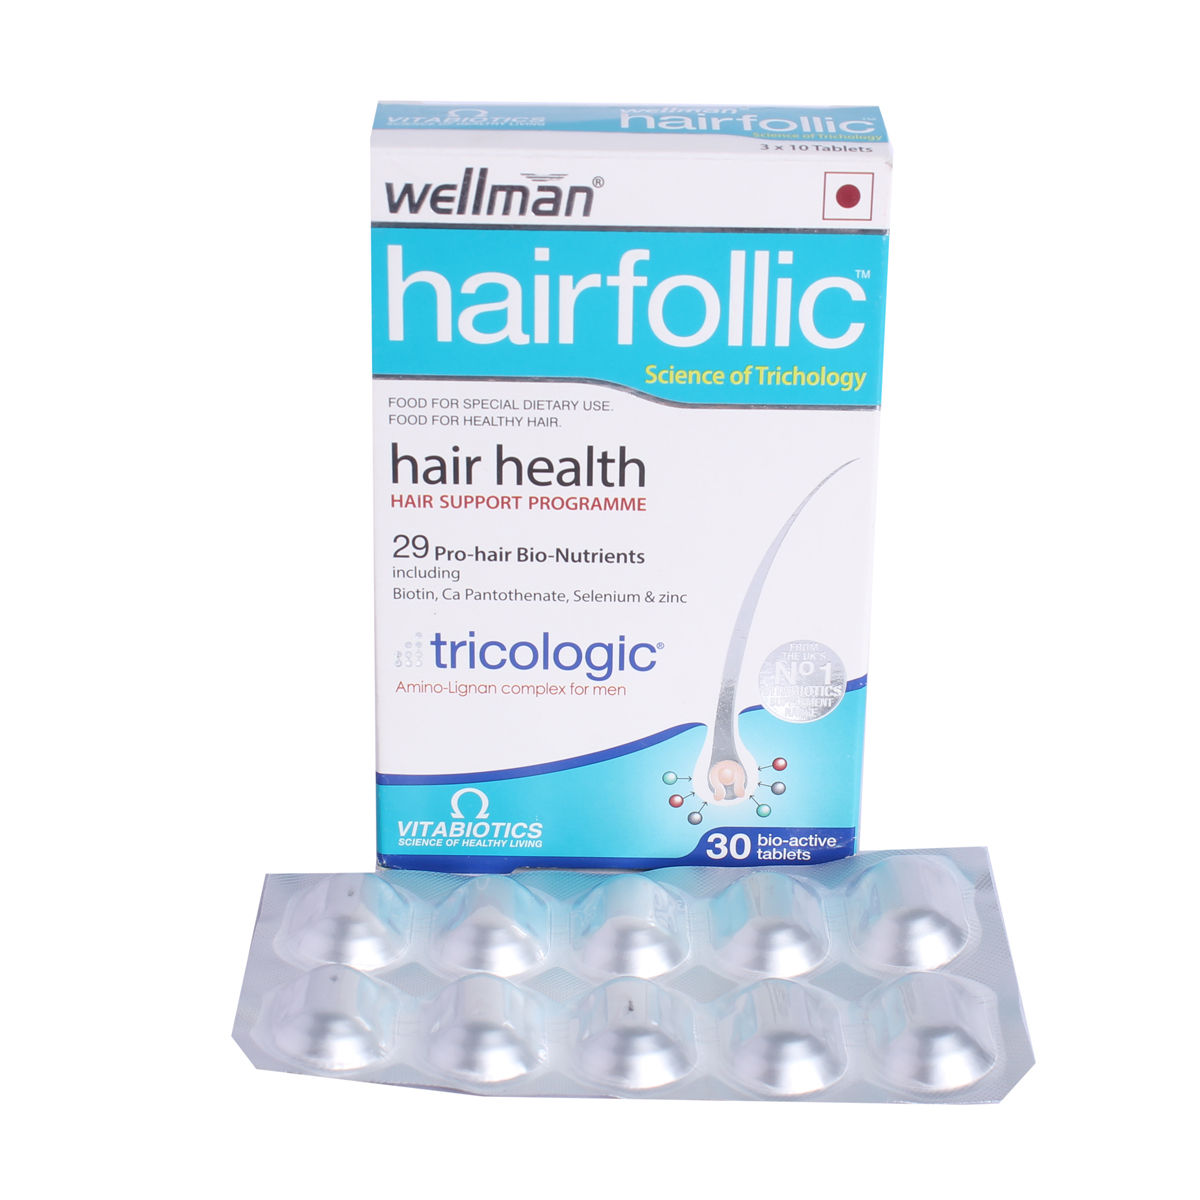 Wellman Hairfollic Tablet 10's Price, Uses, Side Effects, Composition -  Apollo Pharmacy